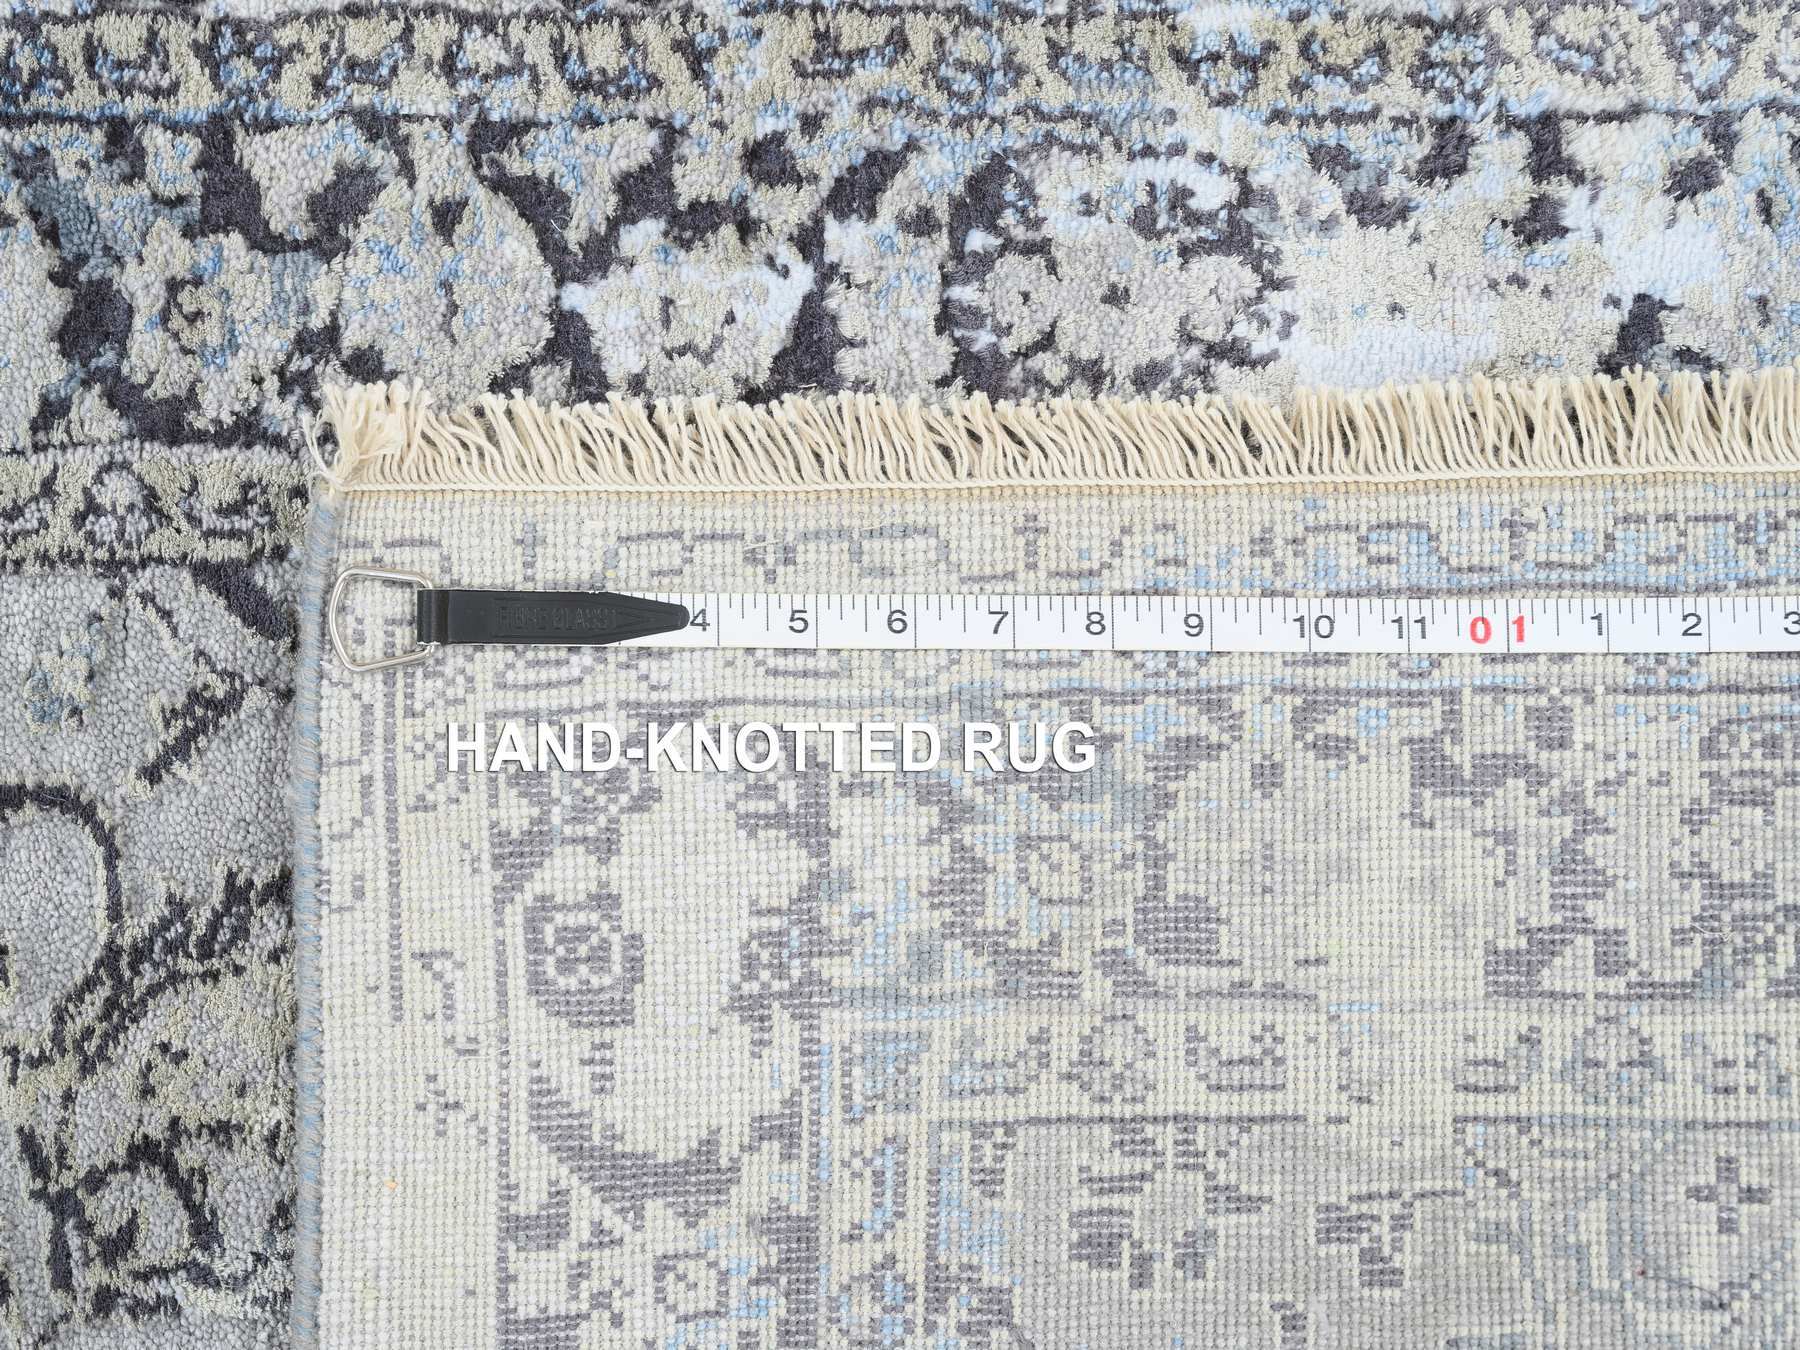 Transitional Rugs LUV581481